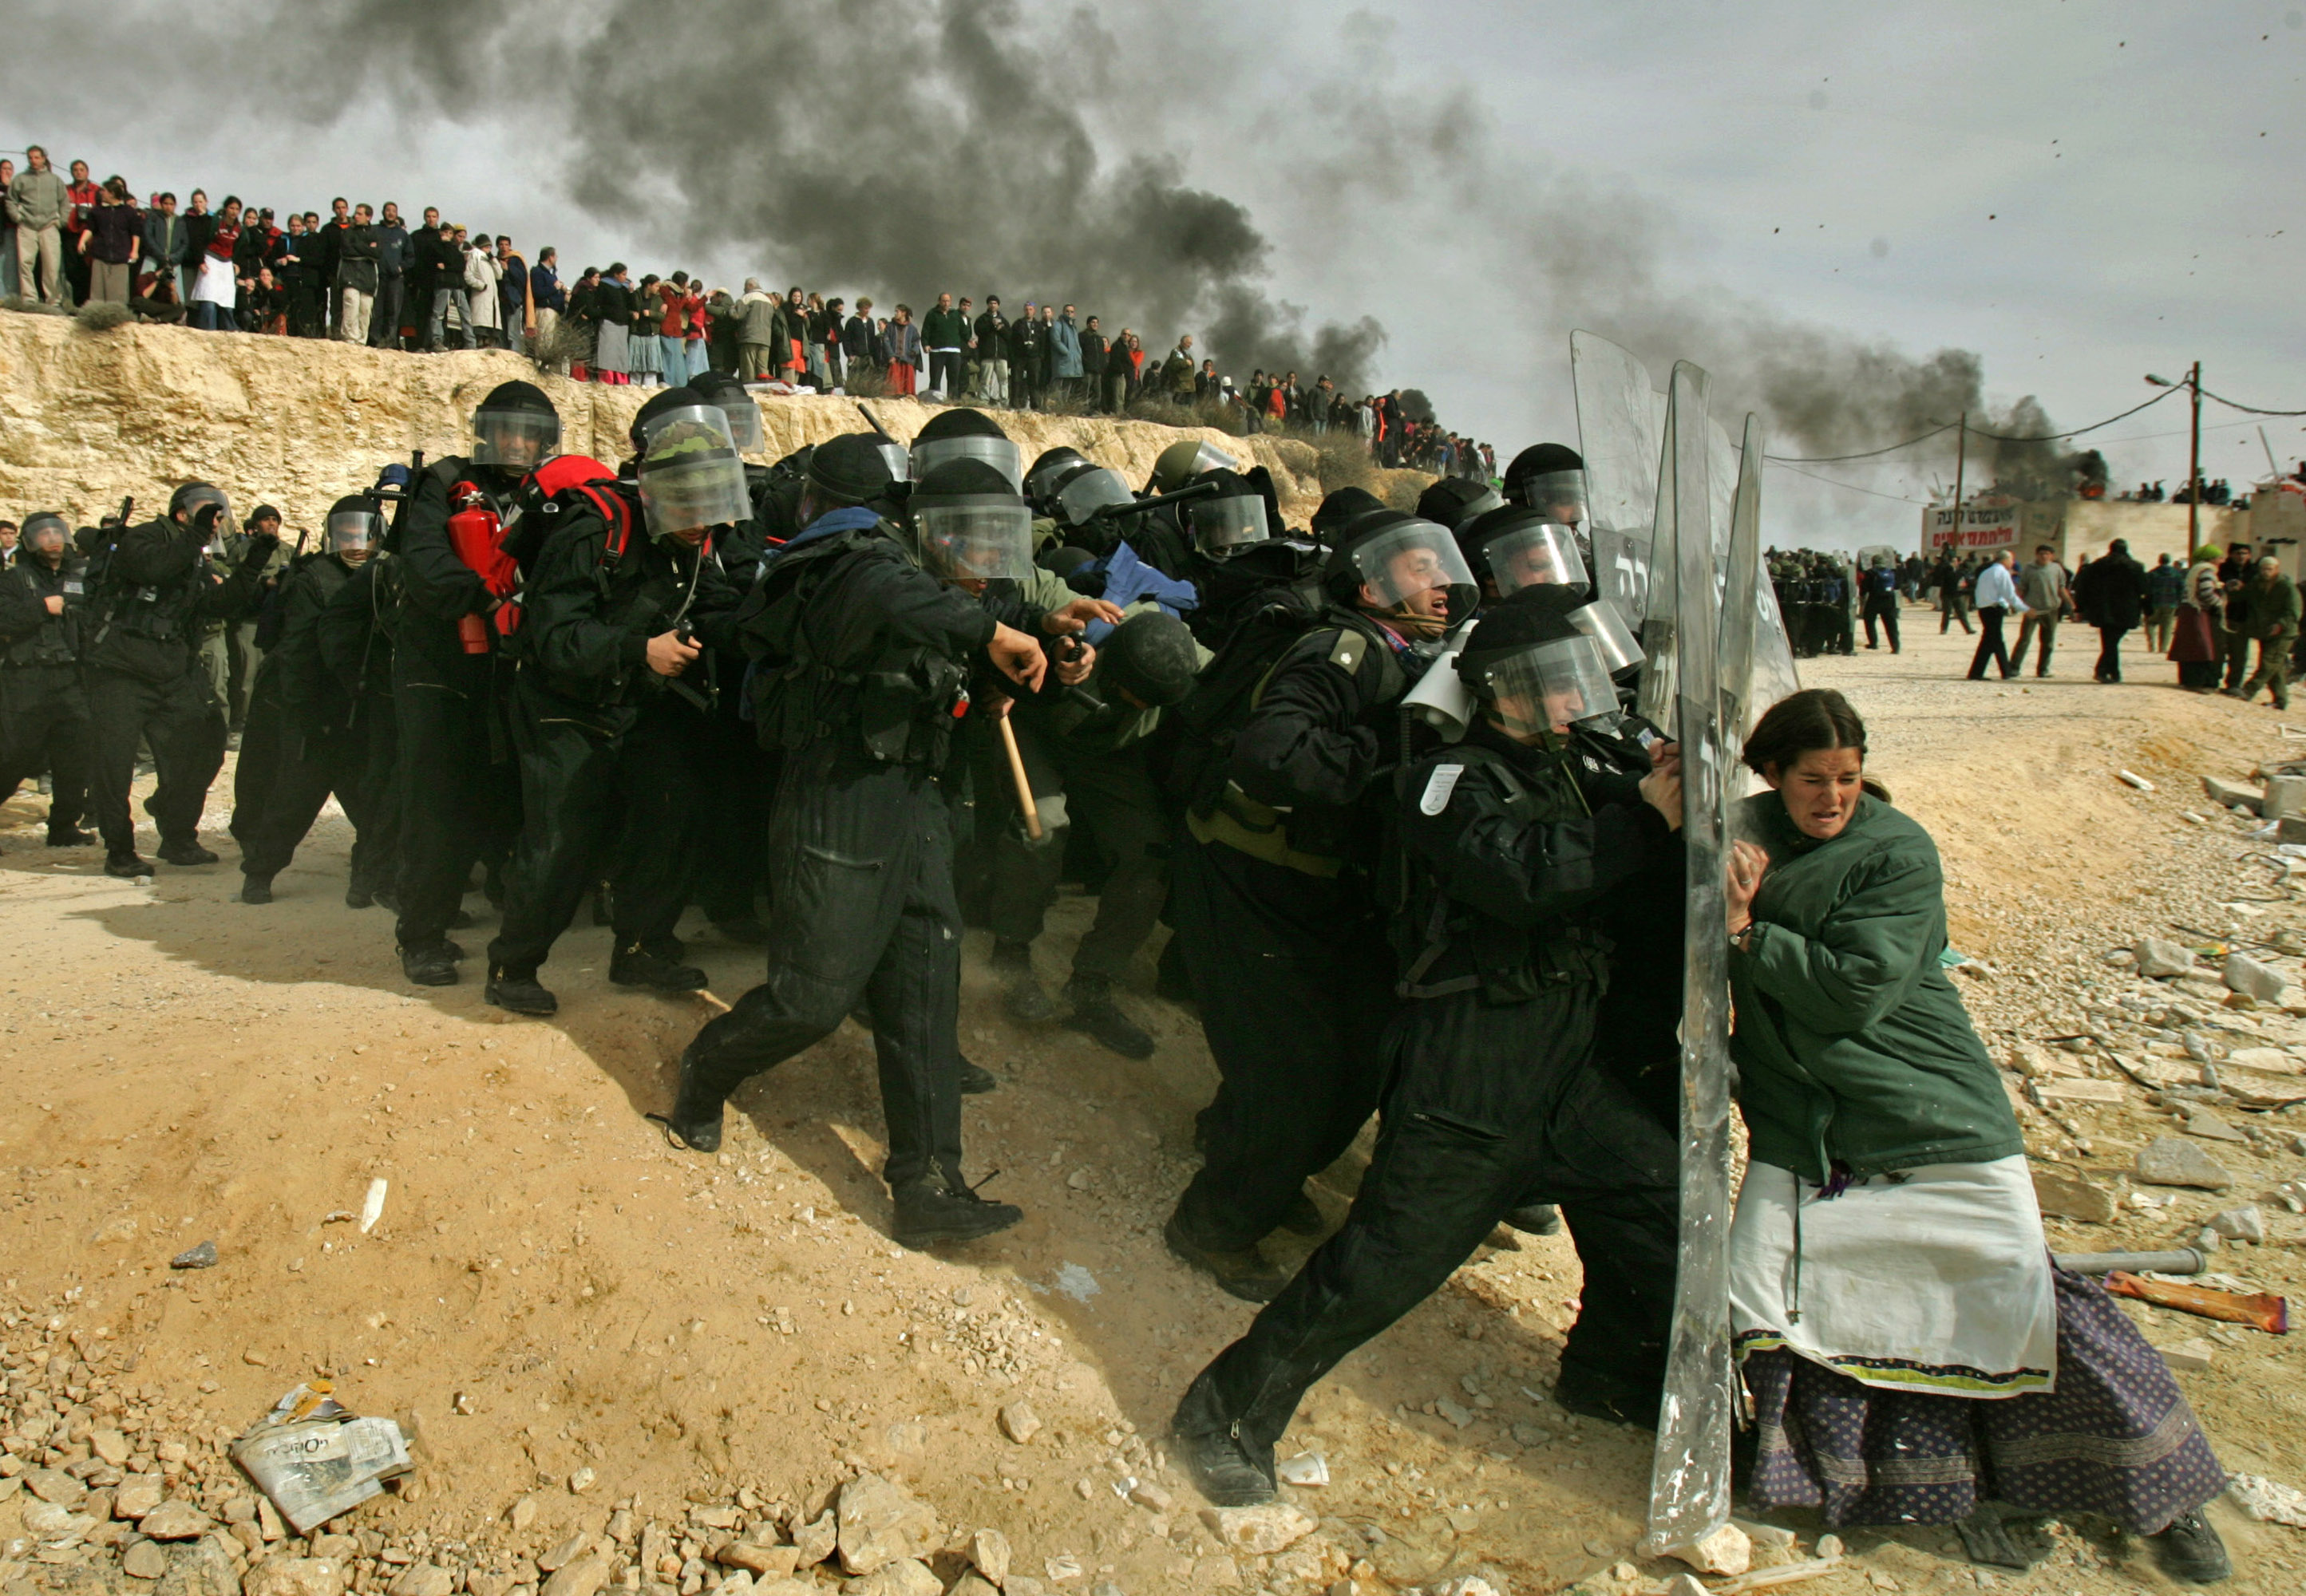 A lone Jewish settler challenges Israeli security officers during clashes that erupted as authorities cleared the West Bank settlement of Amona, east of the Palestinian town of Ramallah, Feb. 1, 2006. Thousands of troops in riot gear and on horseback clashed with hundreds of stone-throwing Jewish settlers holed up in this illegal West Bank outpost after Israel’s Supreme Court cleared the way for demolition of nine homes at the site. (AP Photo/Oded Balilty)